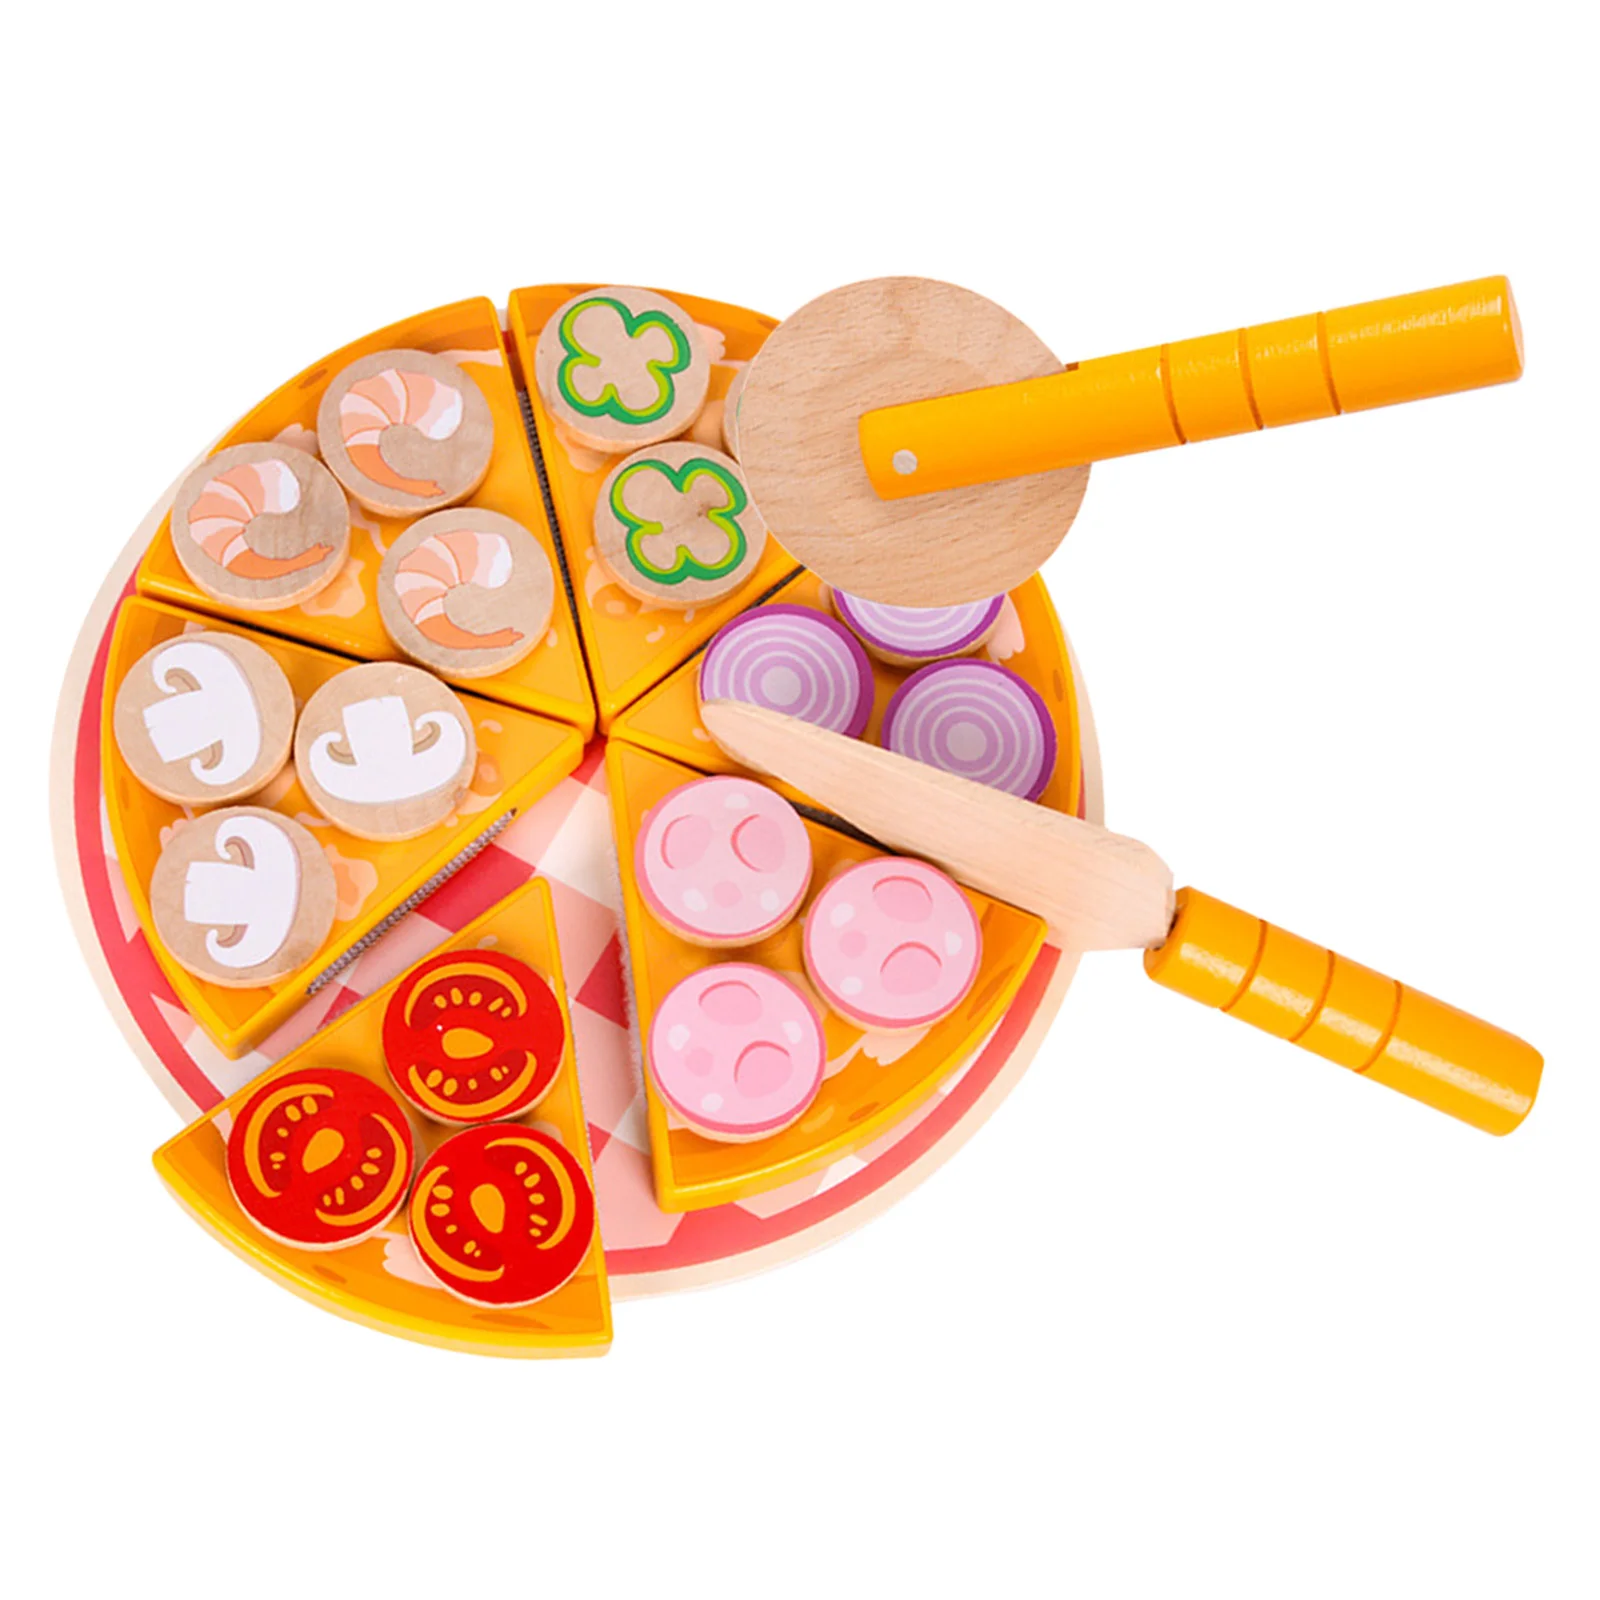 Children's Wooden Pizza Party Play Set Pretend Play Cutting Food for Age 3 +